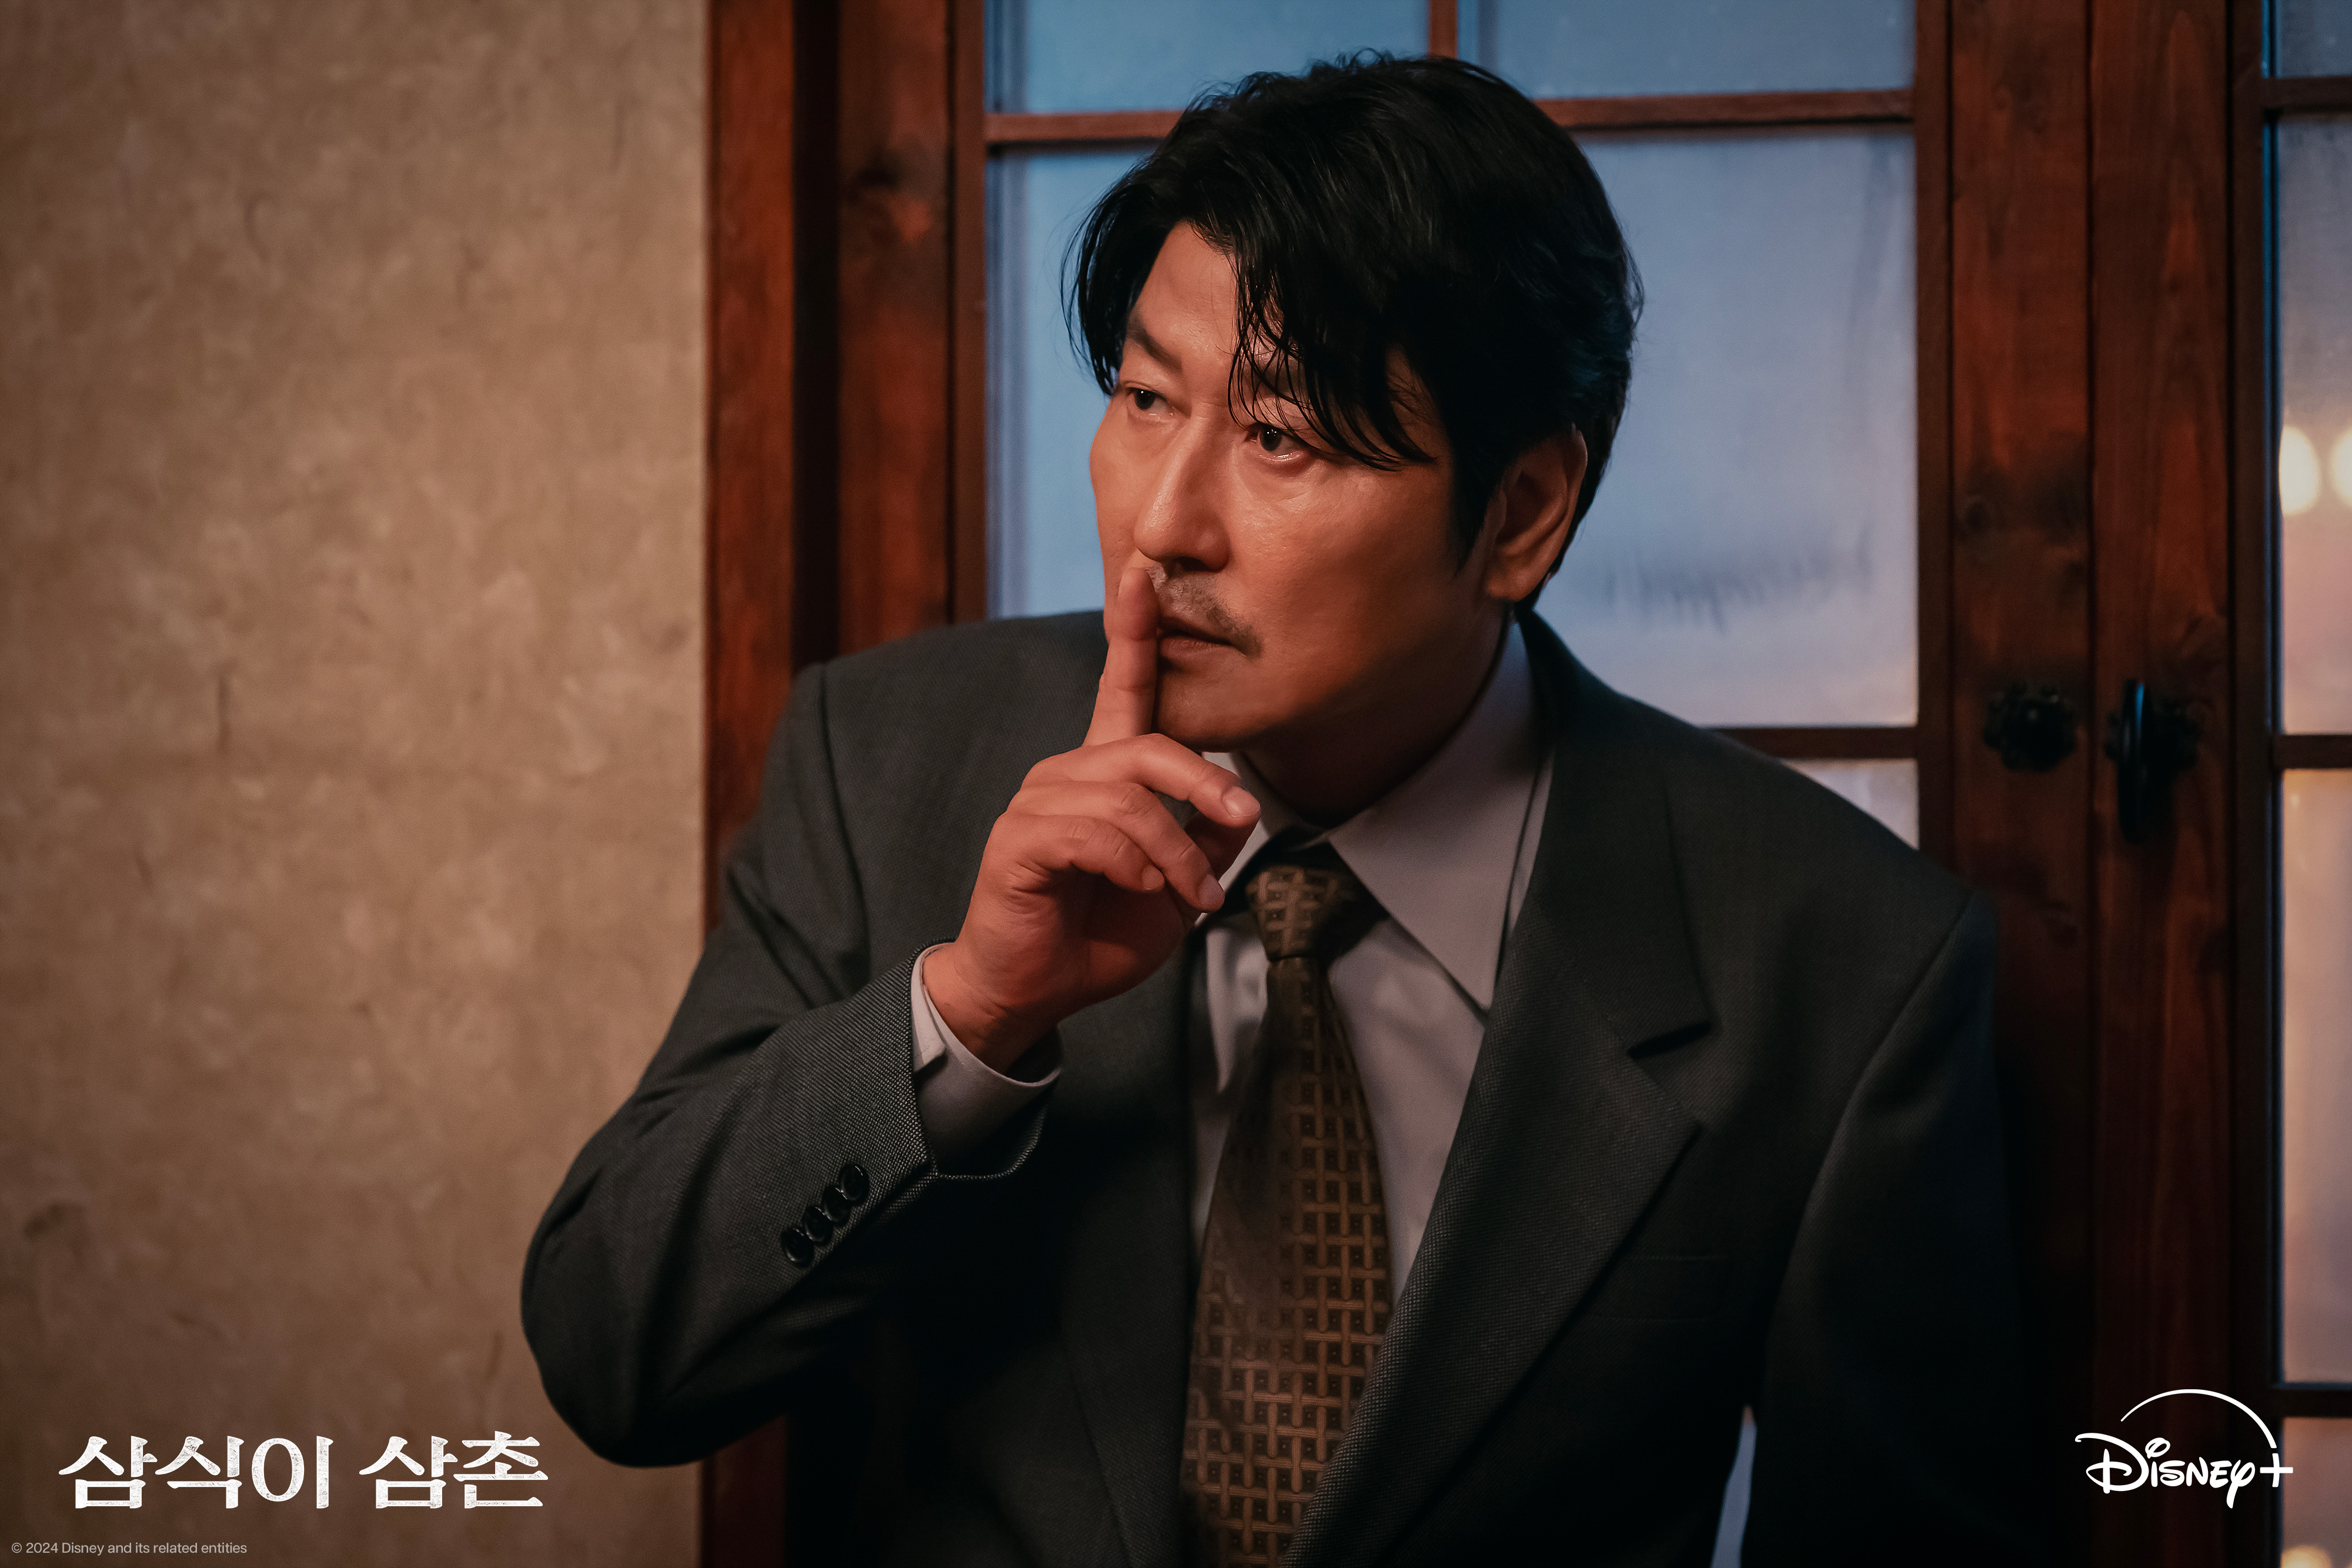 Song Kang Ho Is A Strategist Who Can Grasp Situations Quickly In Upcoming Drama 